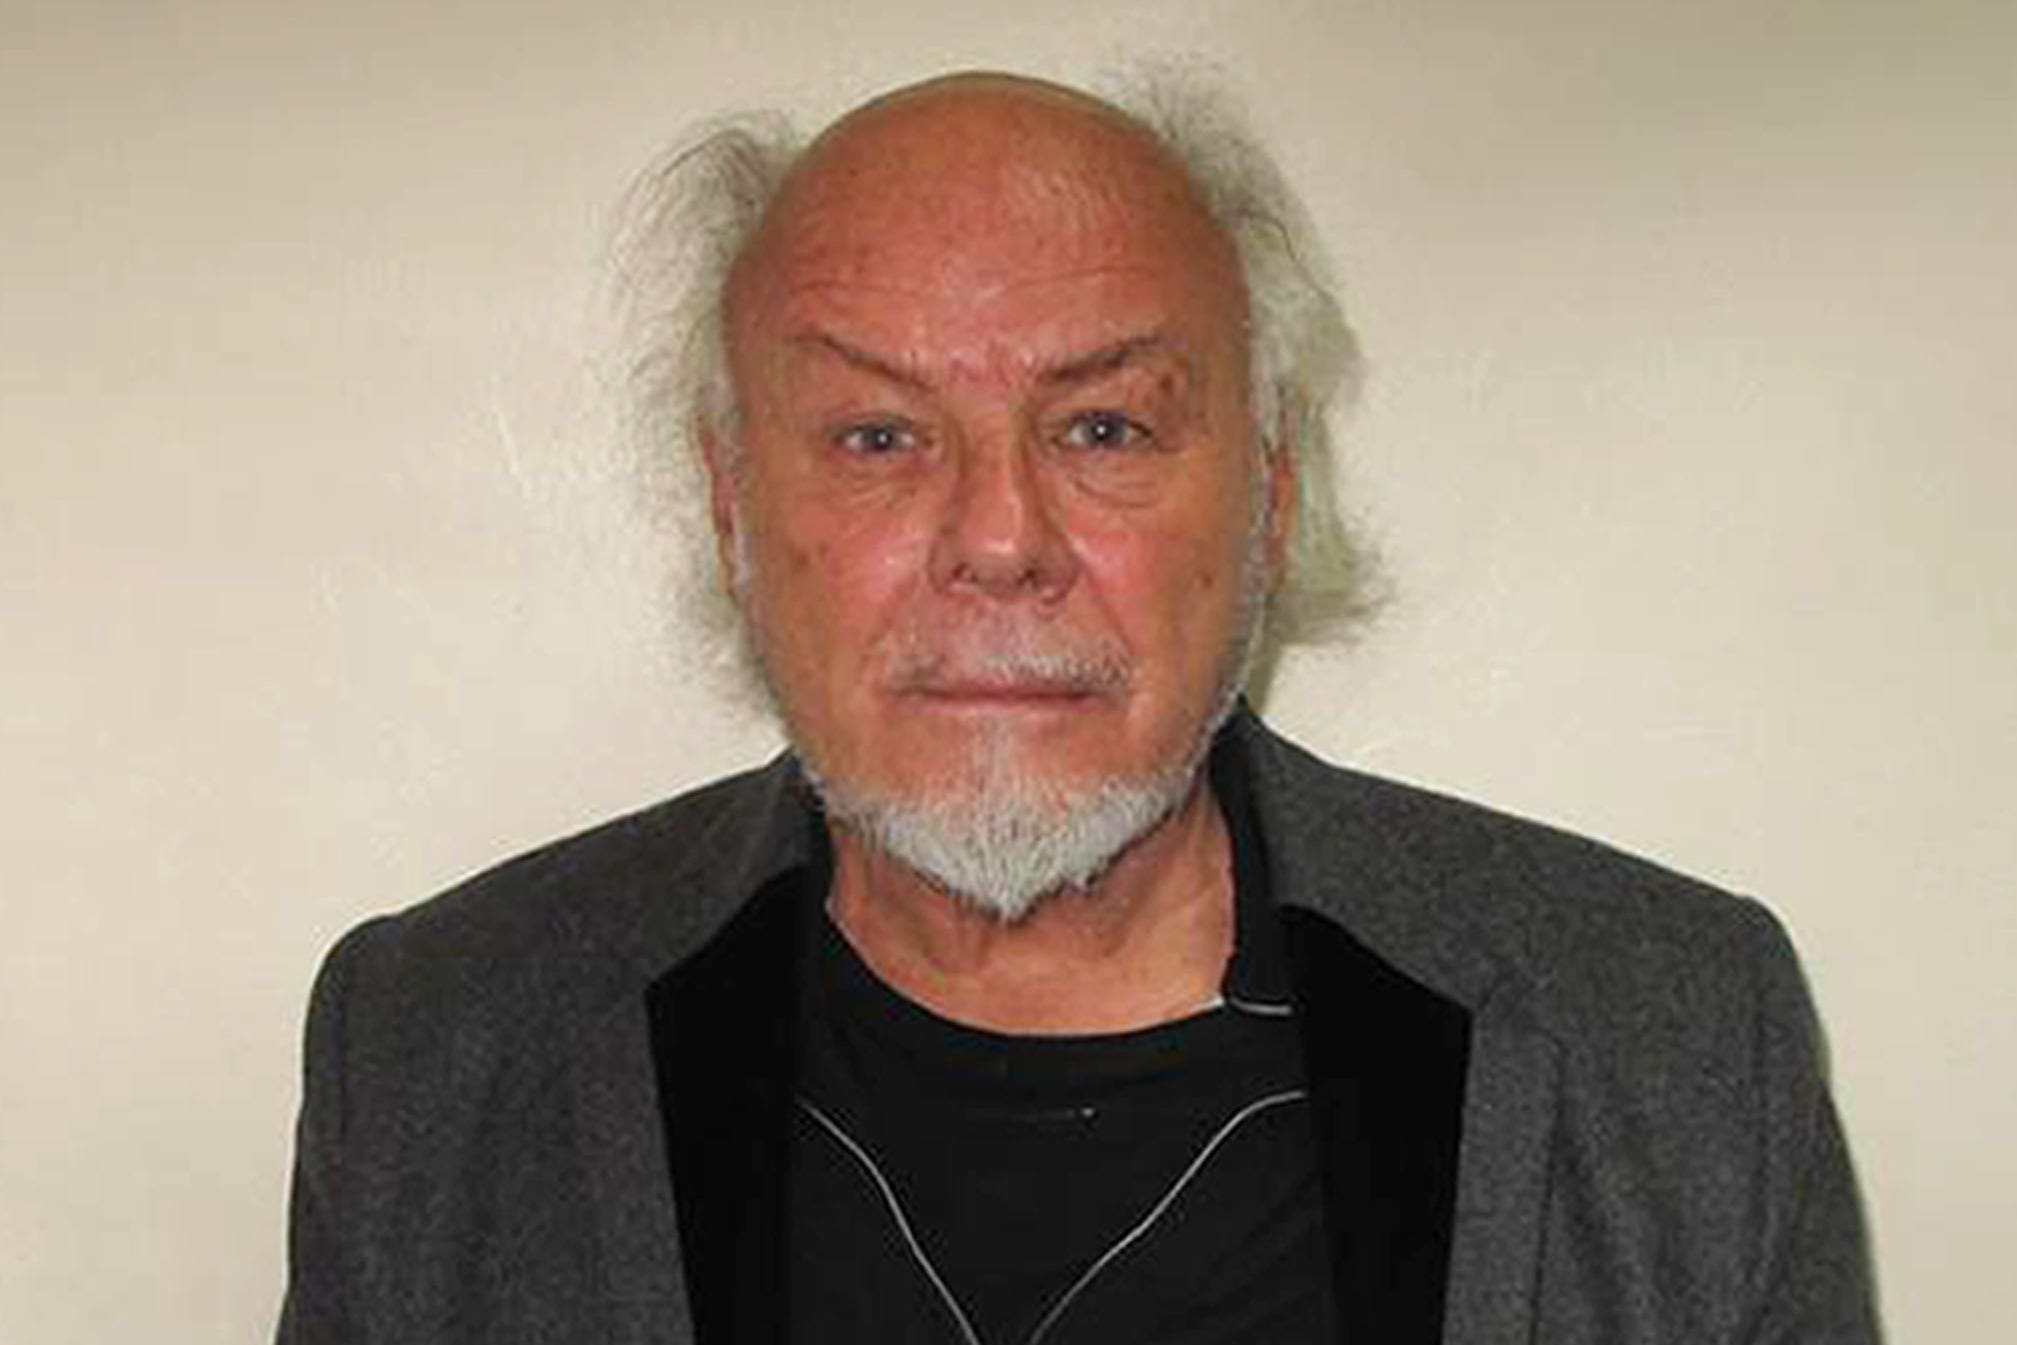 The former singer, real name Paul Gadd, had abused his victim when she was 12 years old